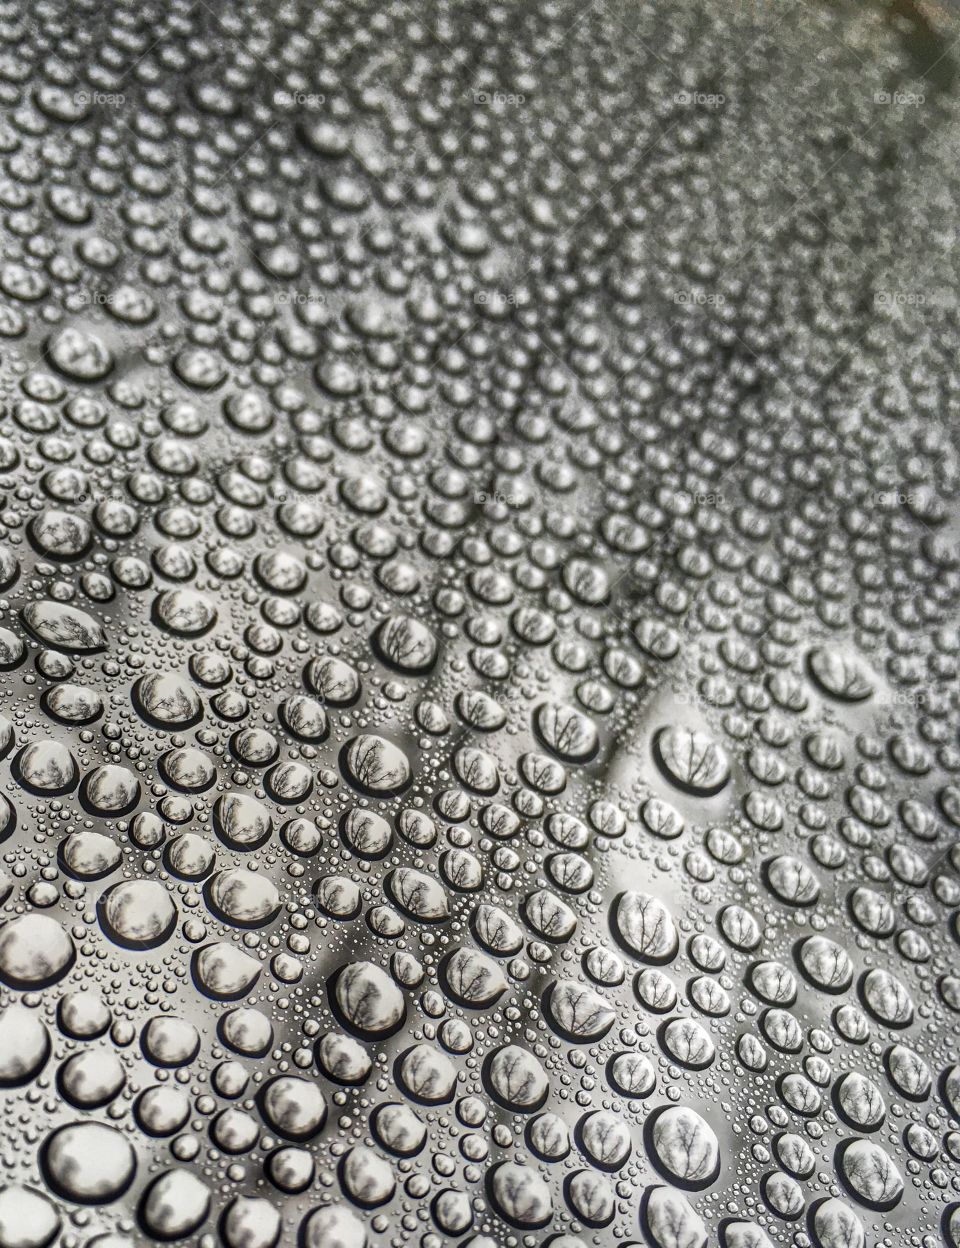 Droplets on my roof